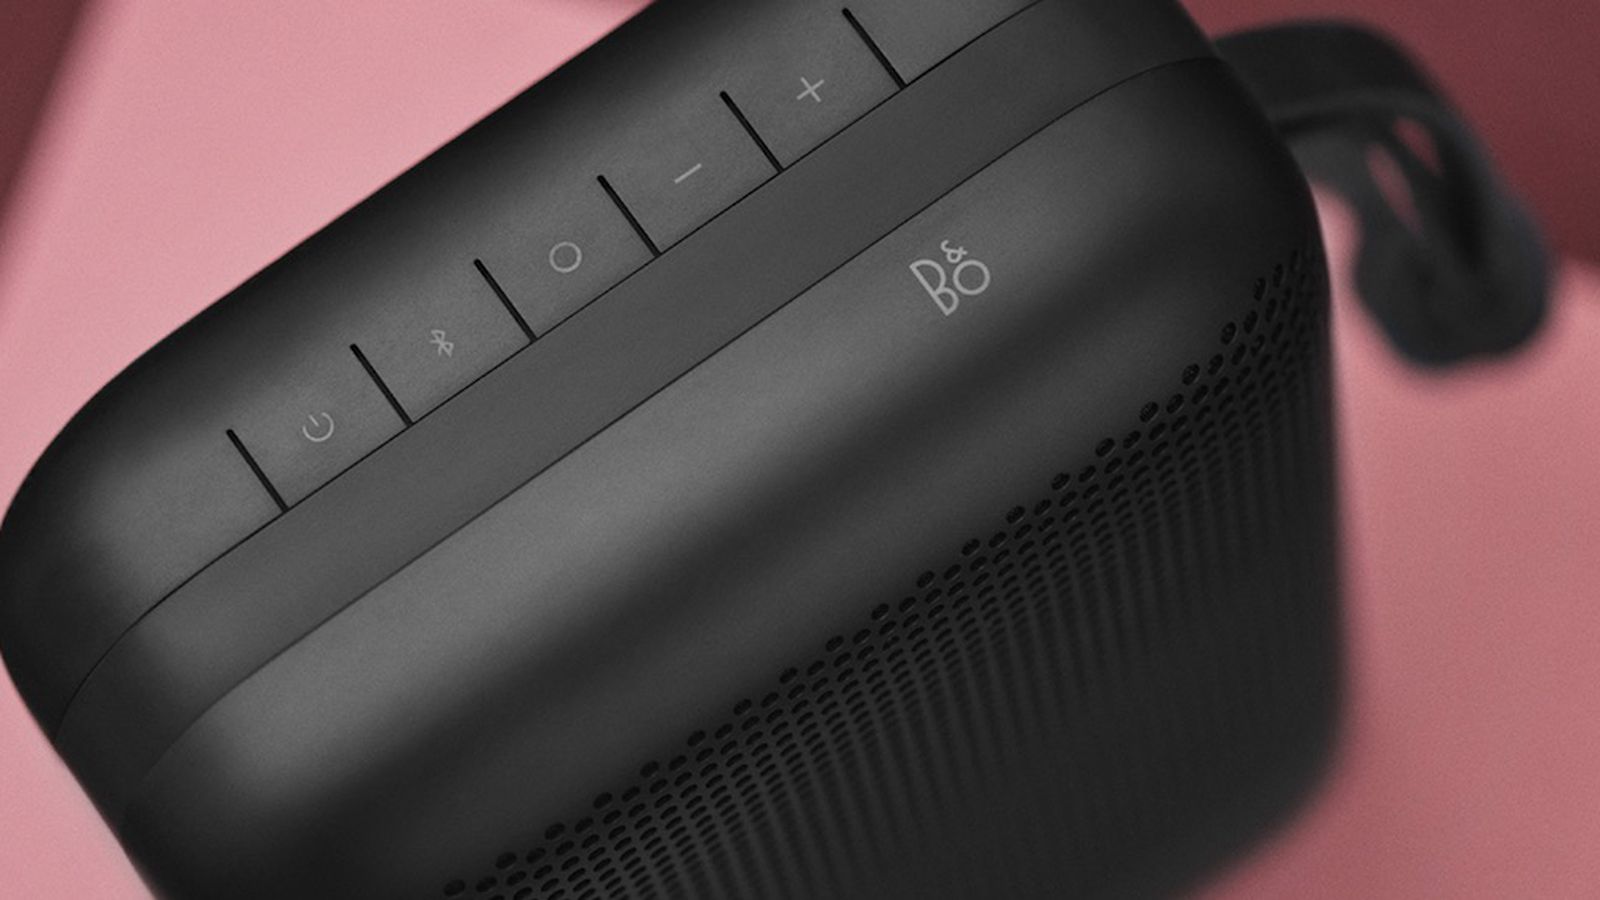 B&O's Beoplay P6 Speaker Blasts Your Summer Playlists In All